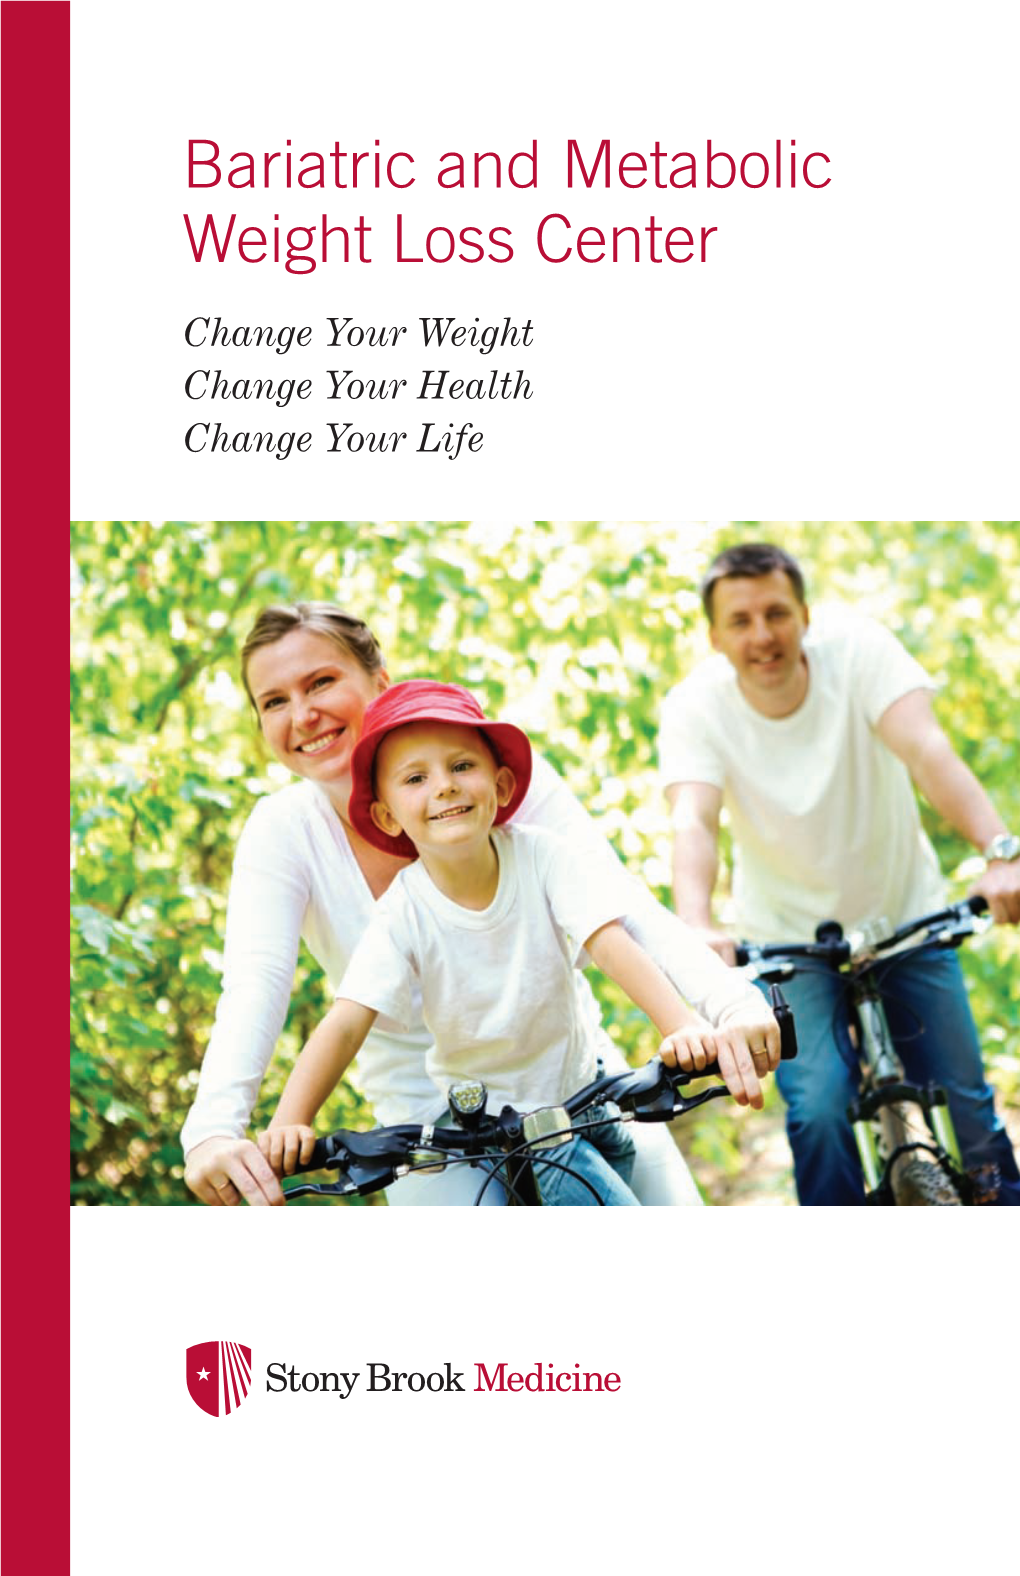 Stony Brook Bariatric and Metabolic Weight Loss Center